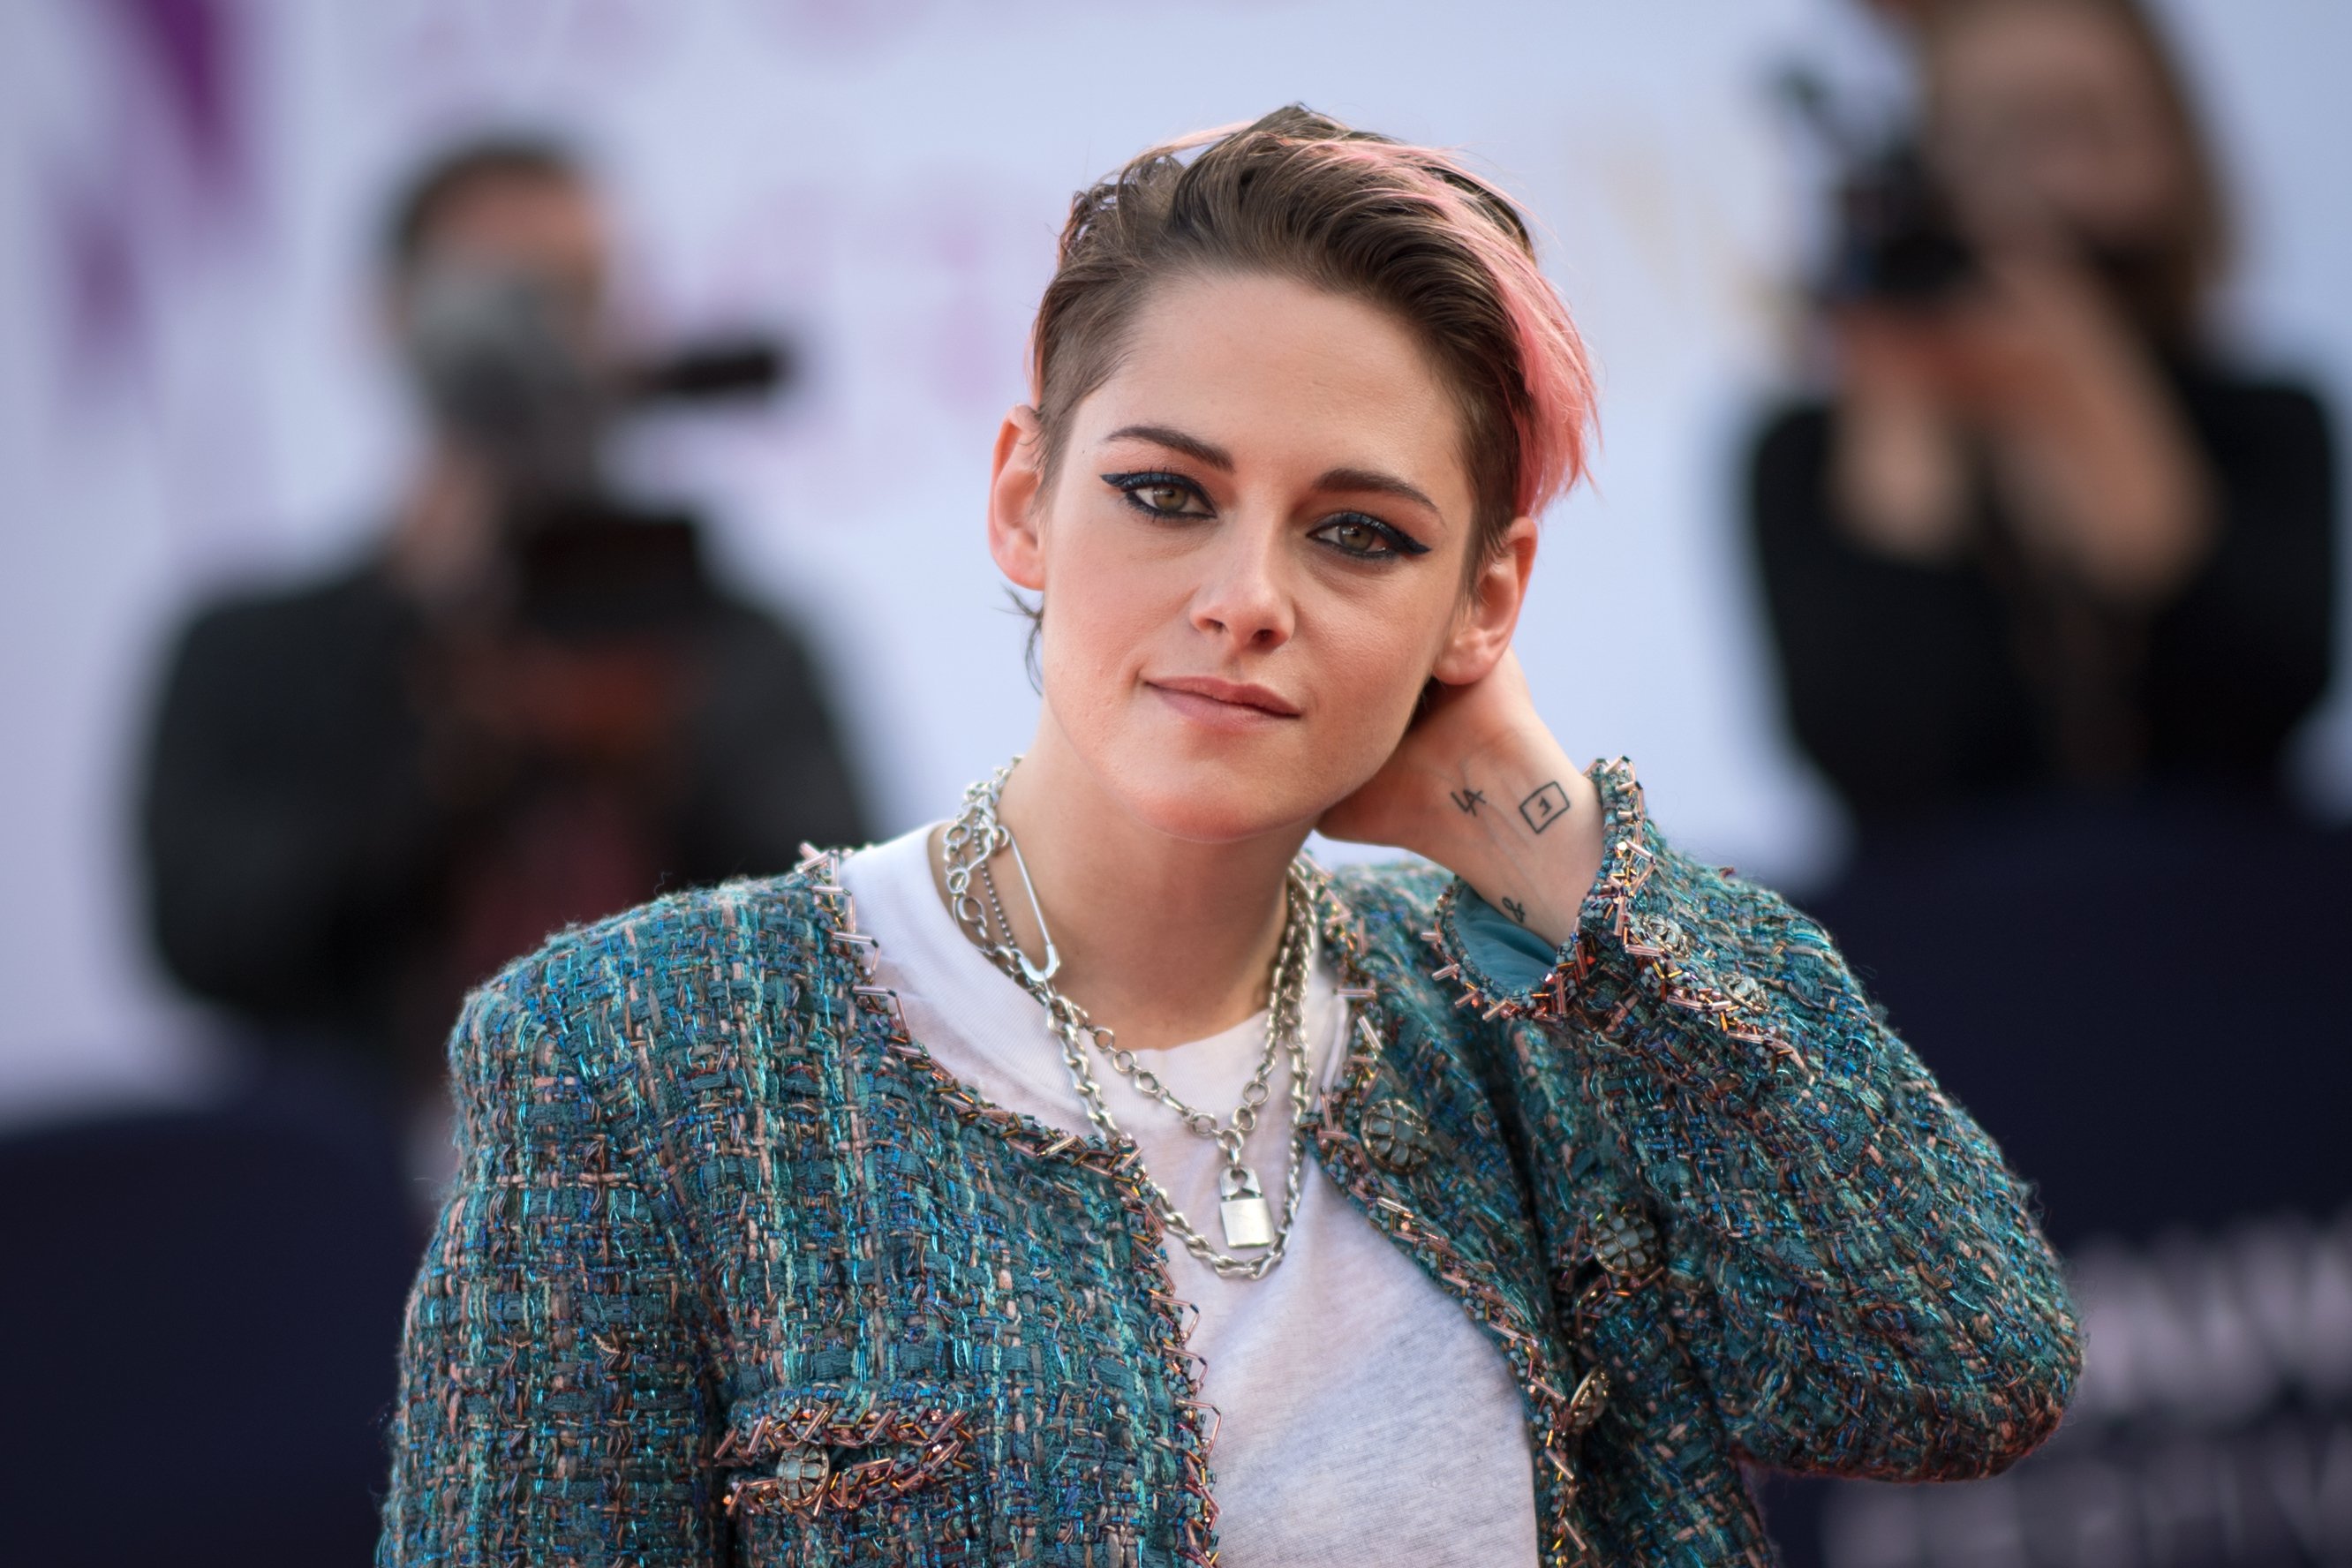 ‘Spencer’ Movie Star Kristen Stewart Reveals Which Scene She Was Almost Too Much of a ‘Control Freak’ to Film